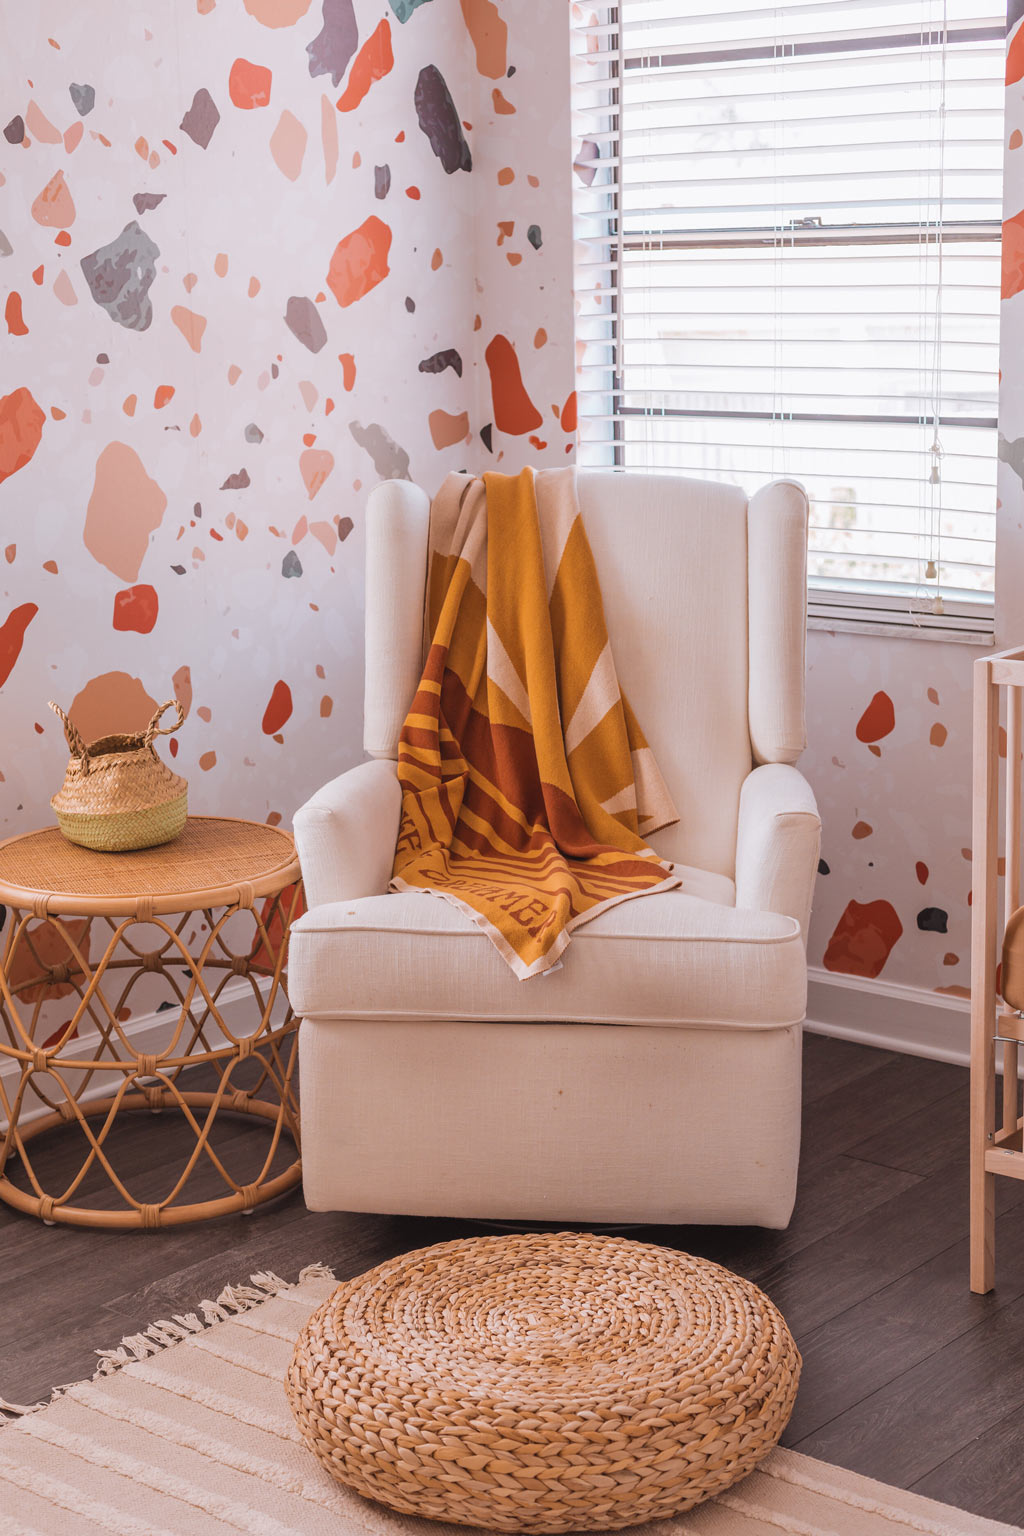 Gender neutral nursery rocking chair corner with terrazzo wallpaper feature wall, warm tone interior decor and woven basket organisation